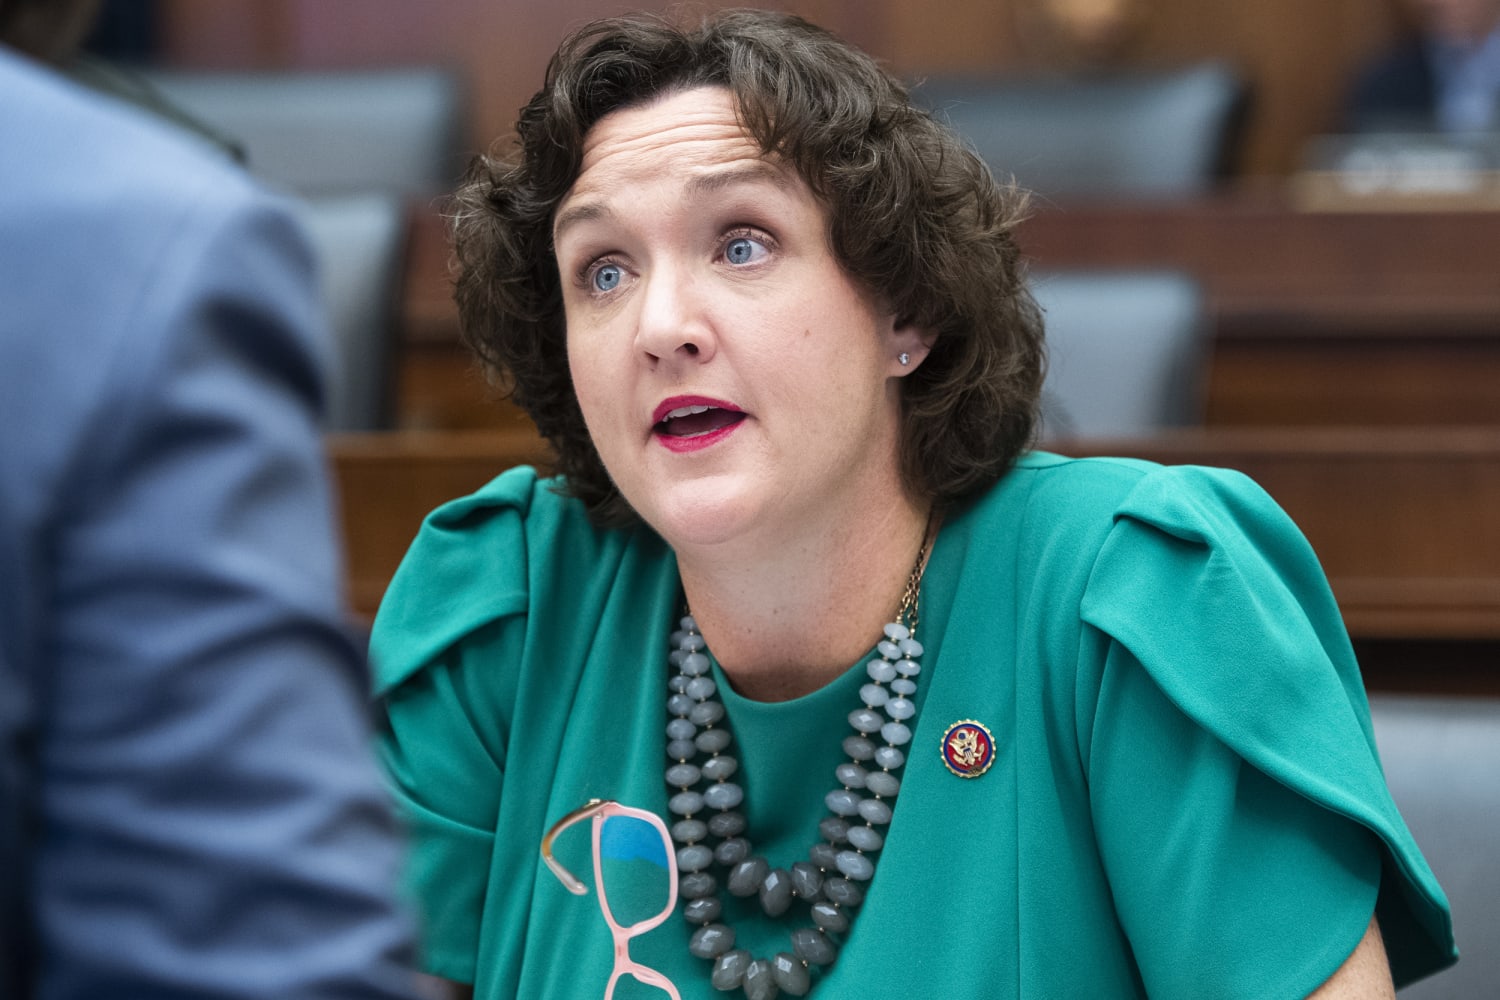 In a key swing district, Katie Porter clashes with GOP opponent over  inflation and 'Orange County values'